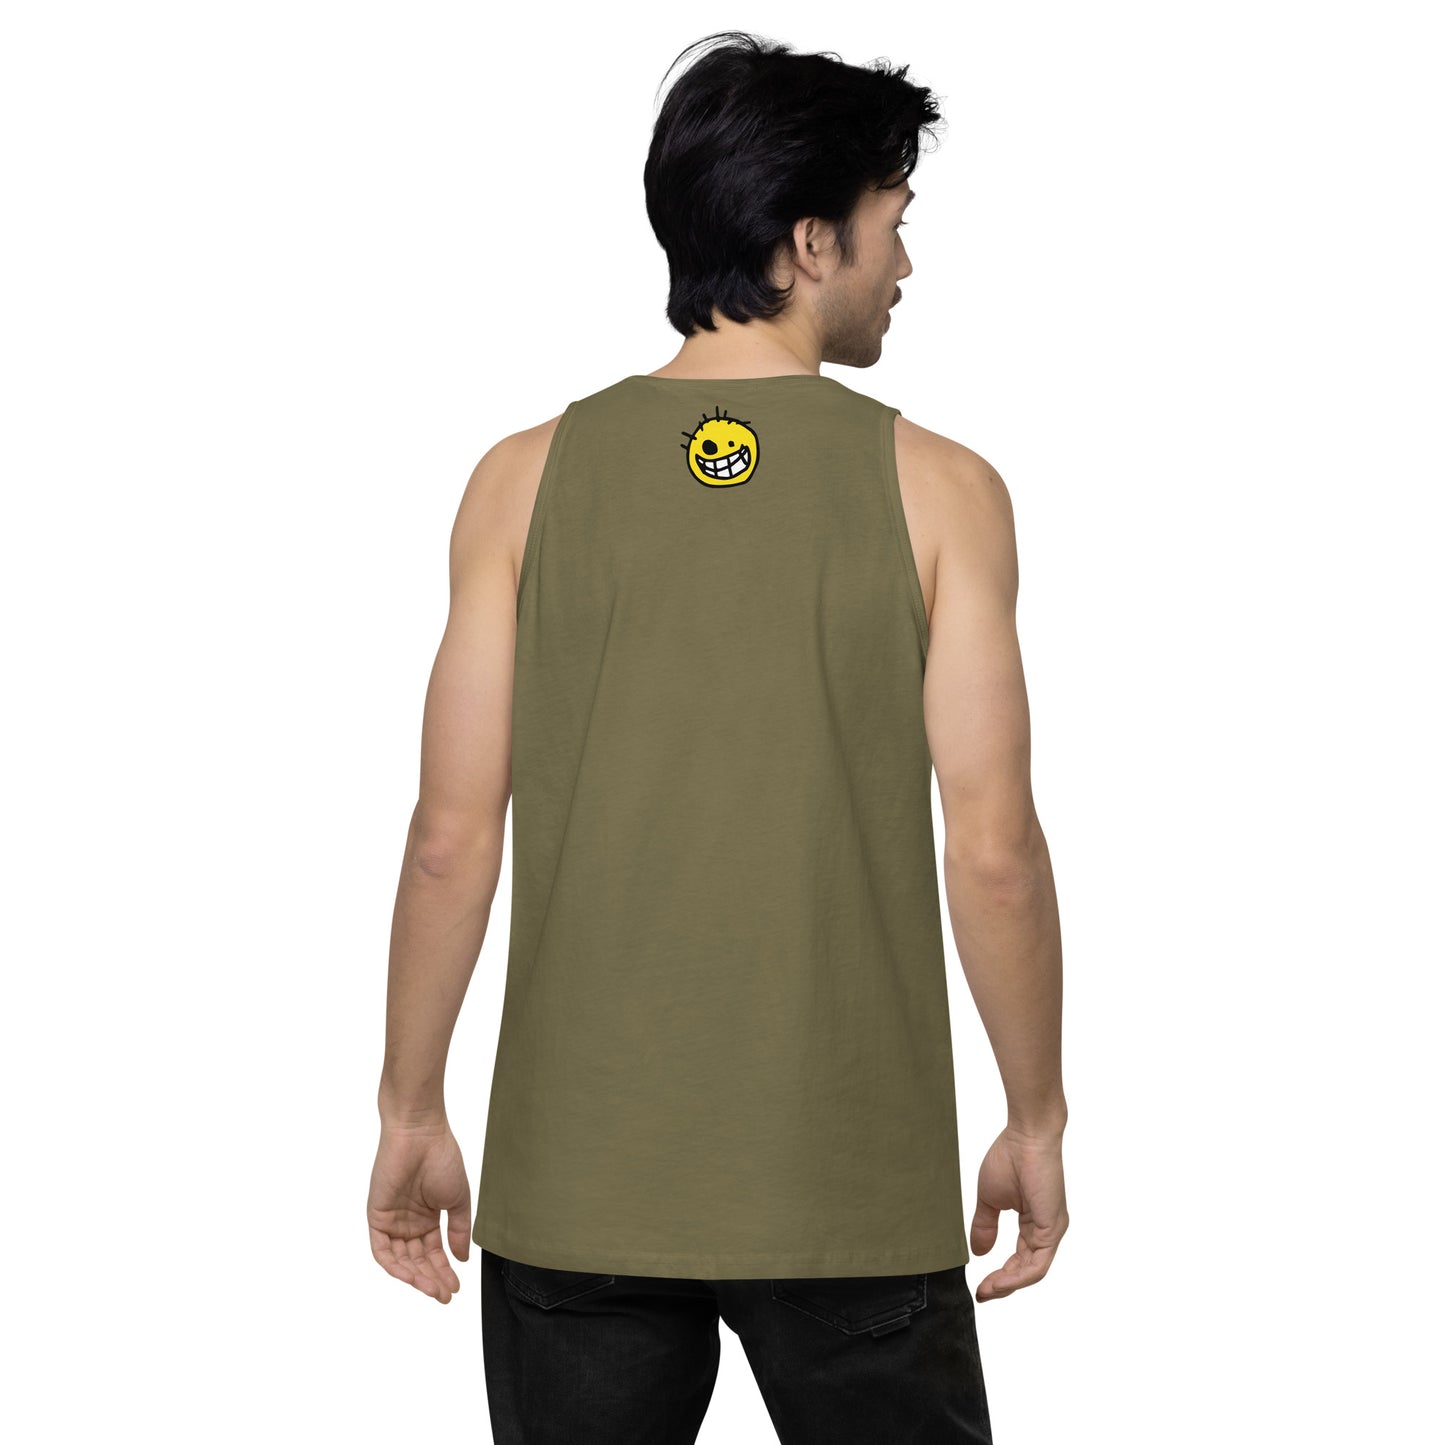 Fantasy Football is Cool Tank top - Untested